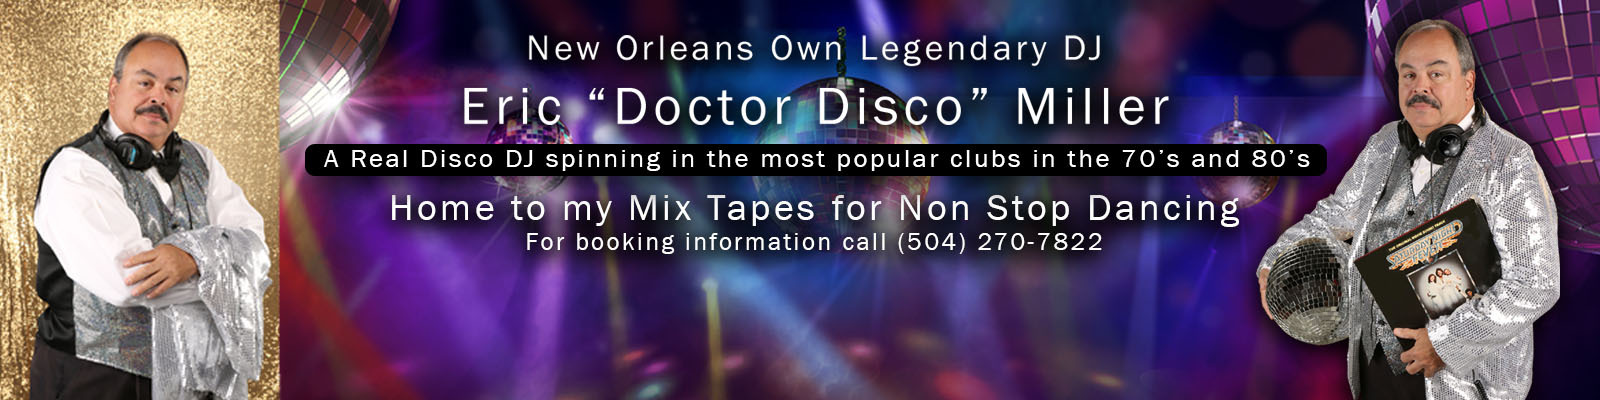 Doctor Disco's Mix Tapes